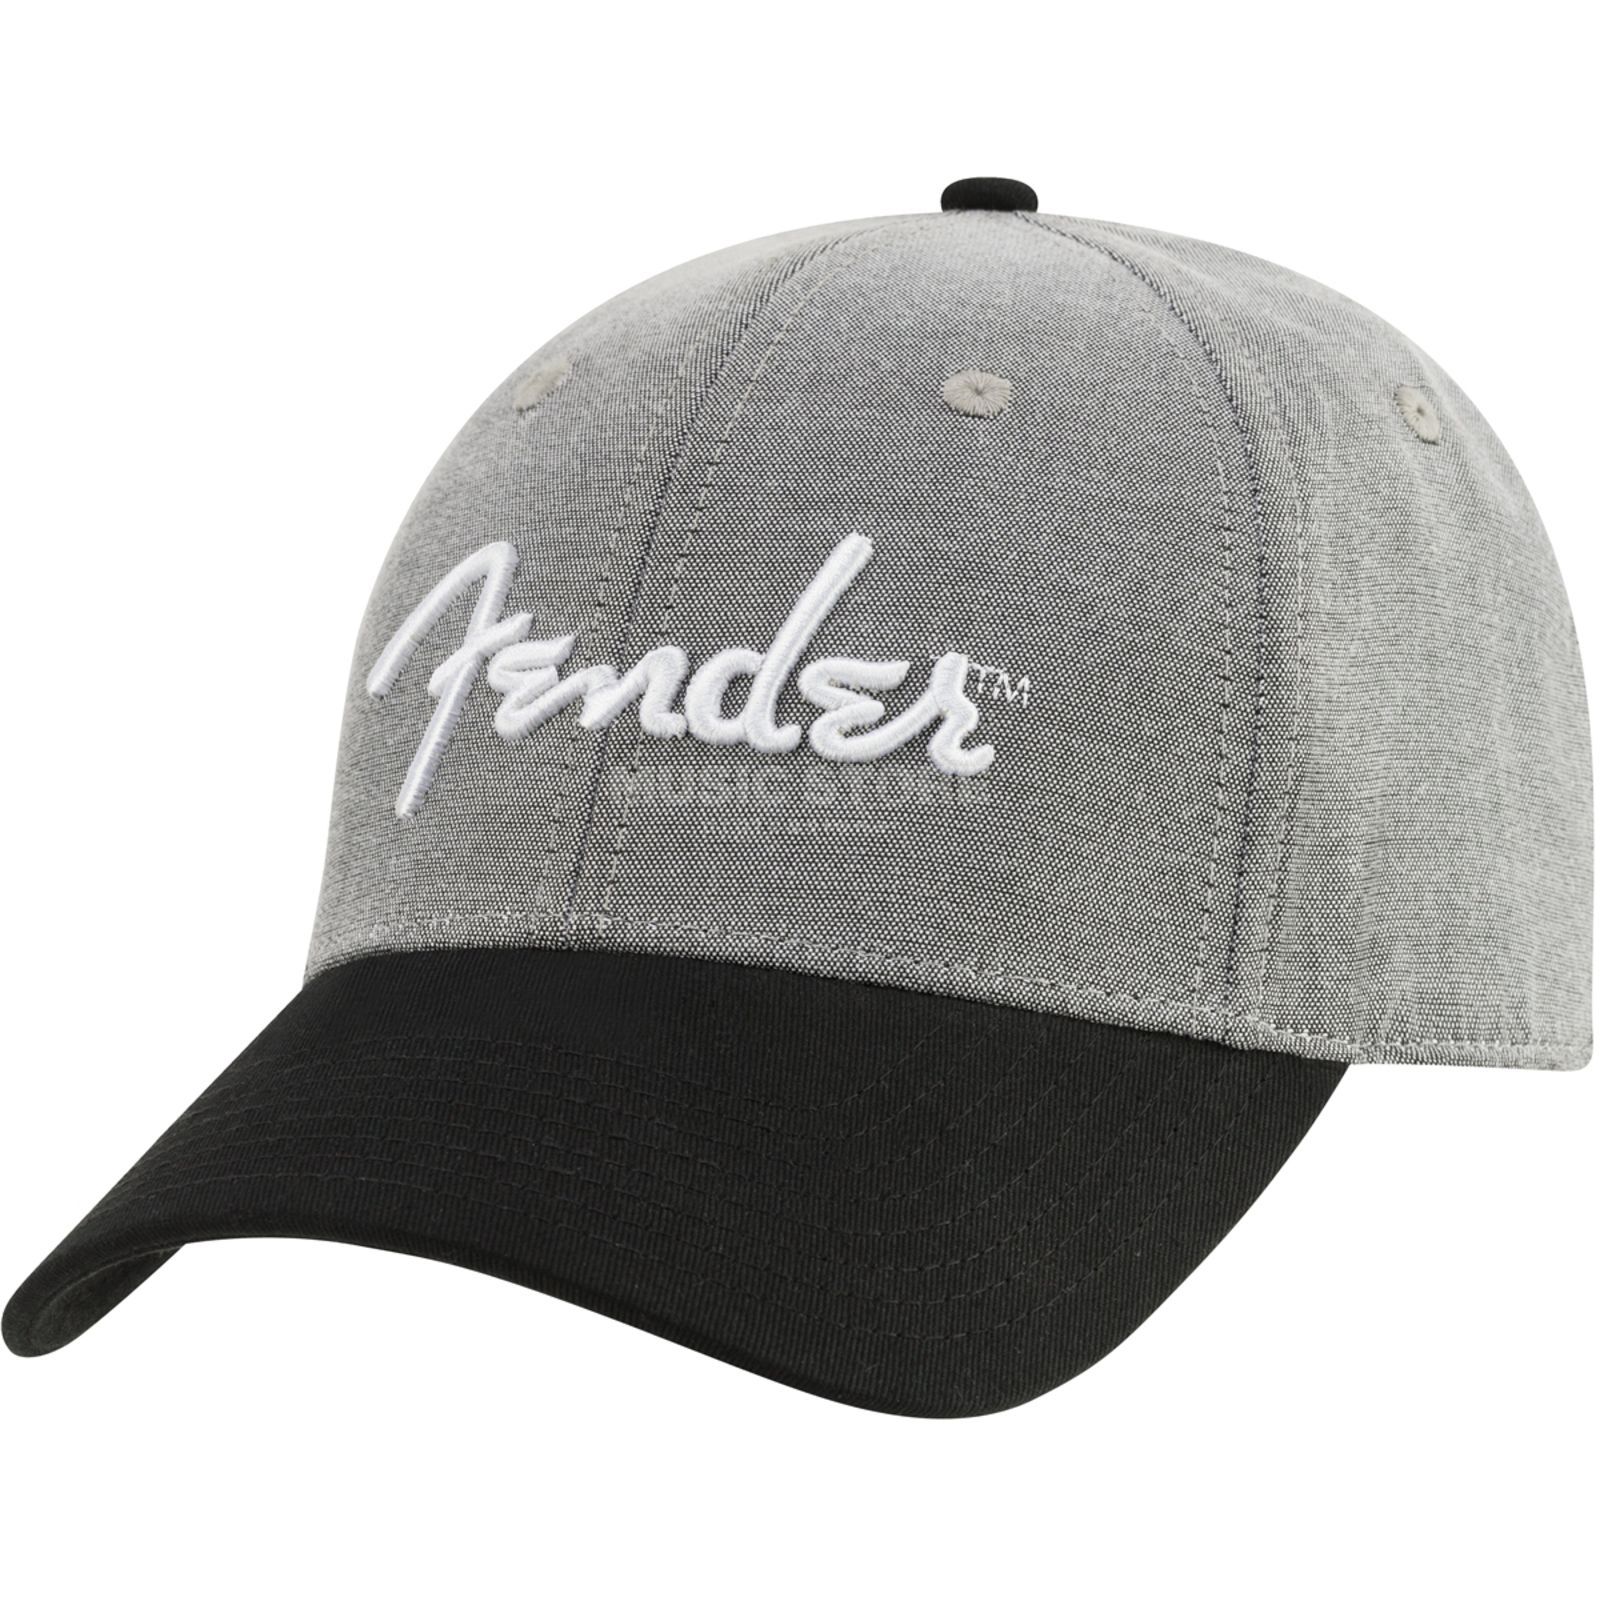 Fender® Hipster Dad Hat Cap, Gray and Black